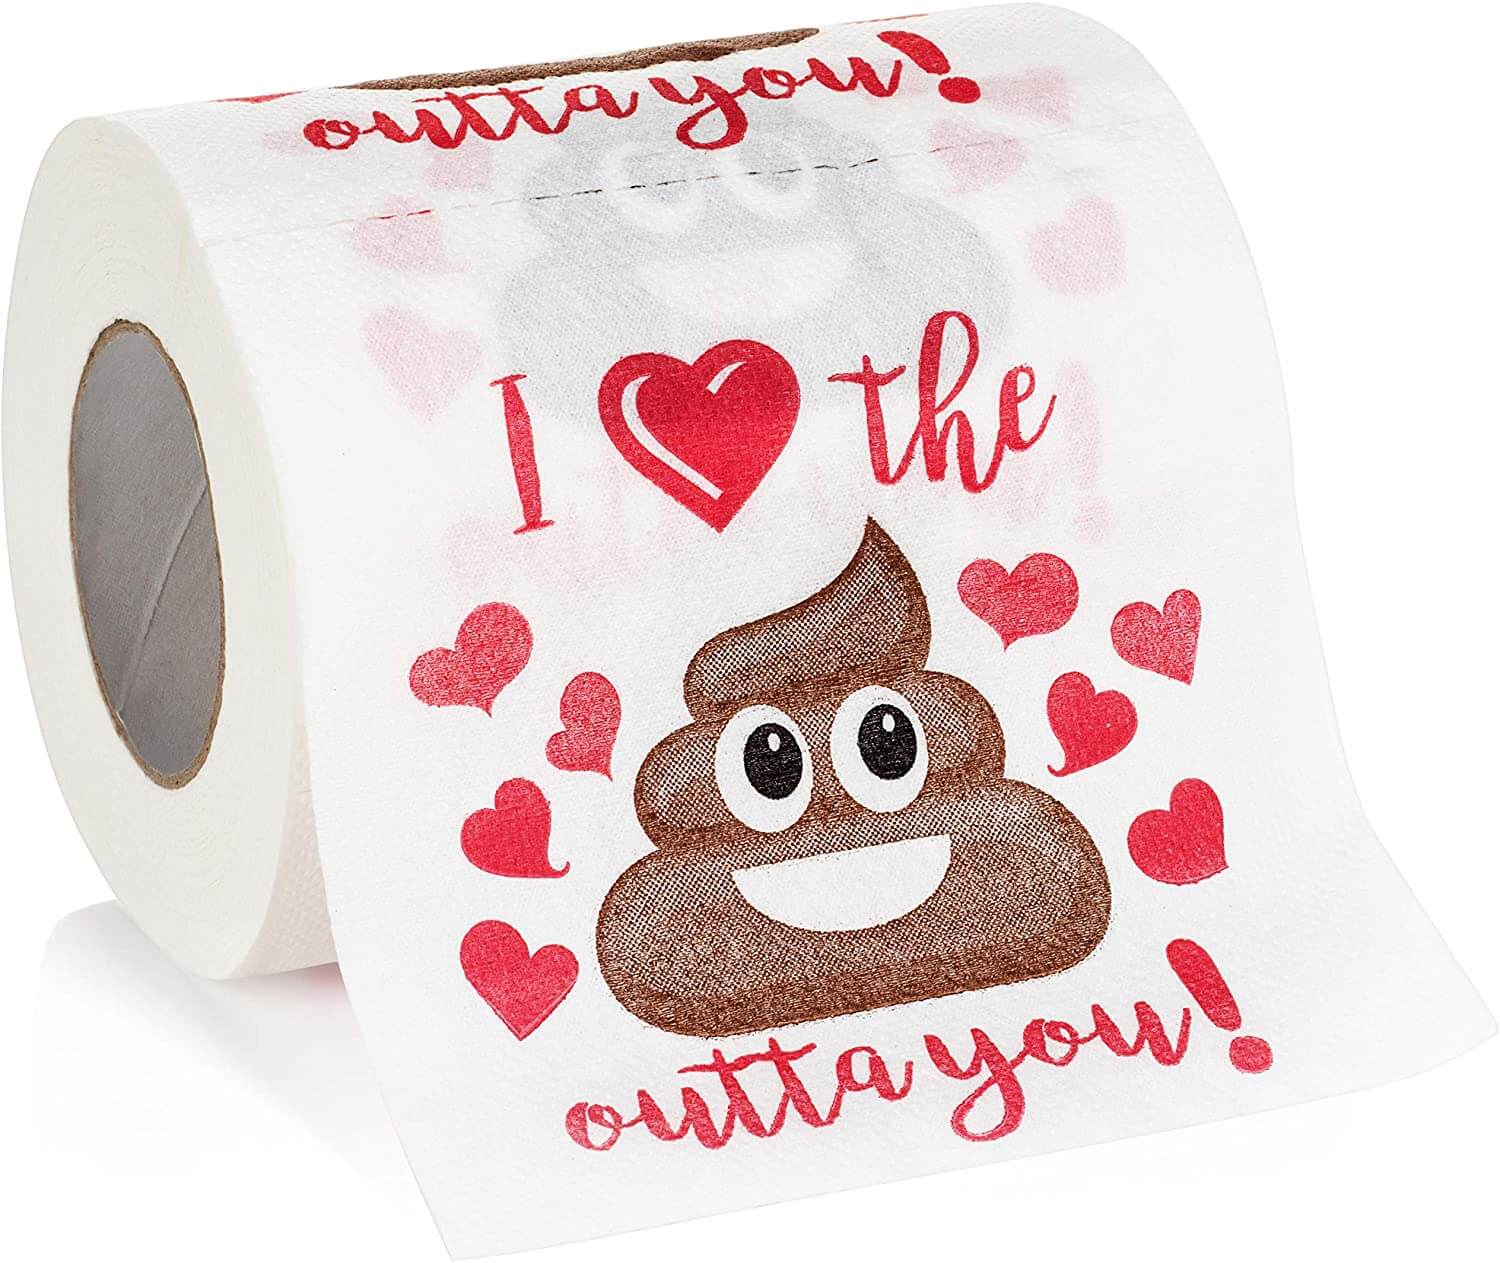 Funny and captivating toilet paper